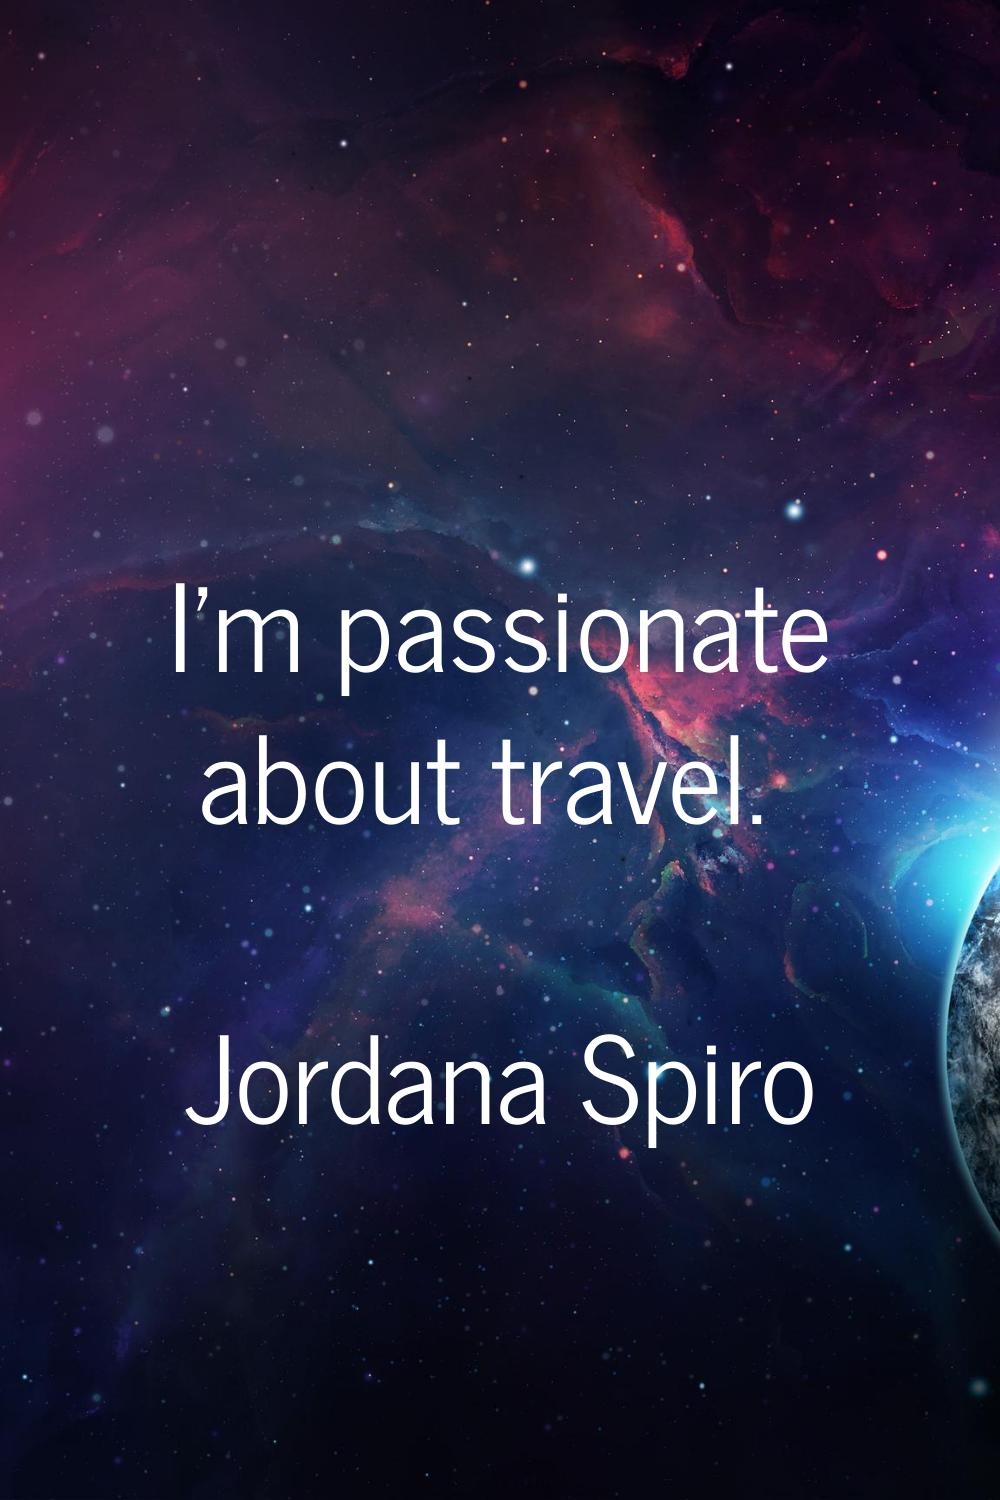 I'm passionate about travel.